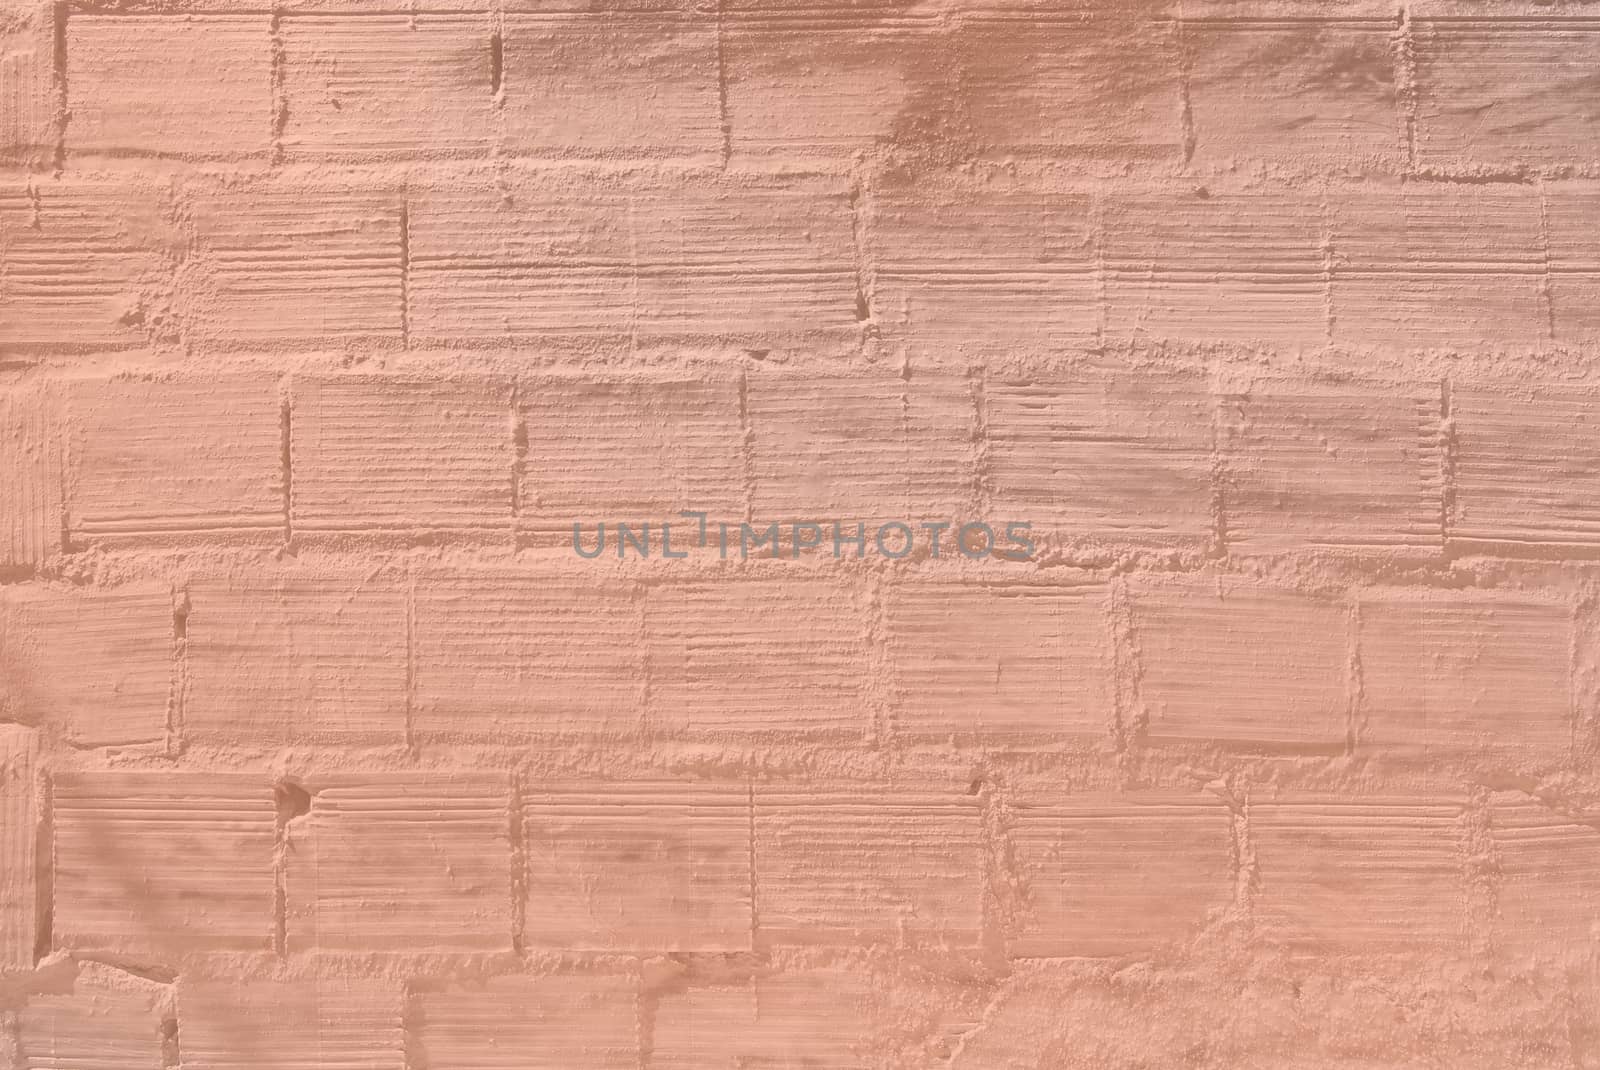 Roughcast on brick wall pattern texture background toned in color Living Coral